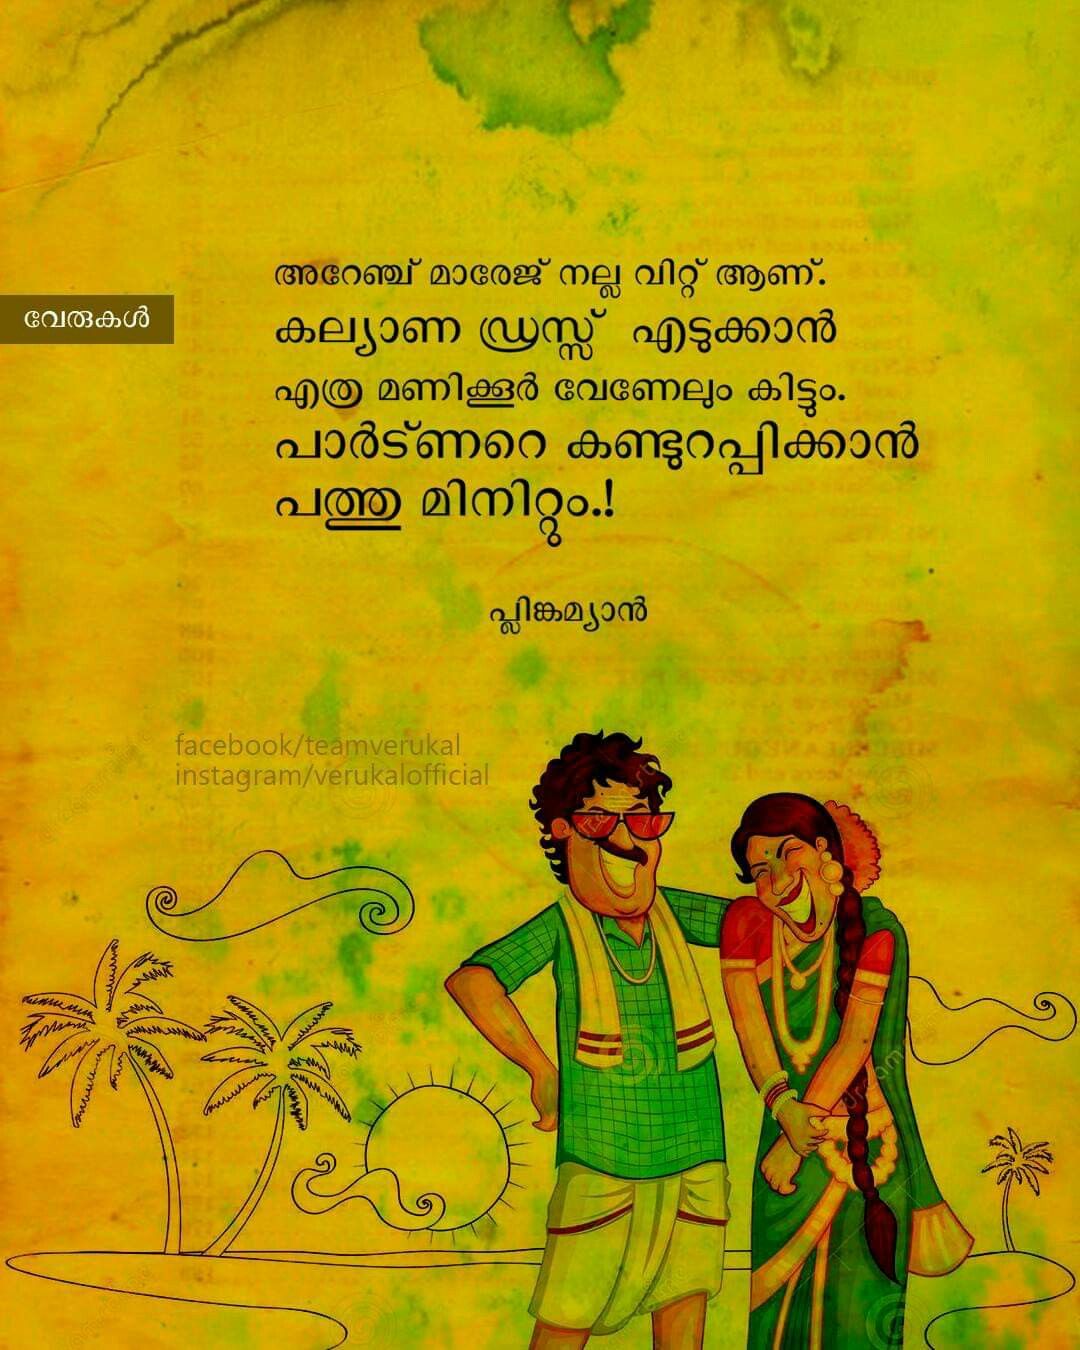 travelling meaning in malayalam